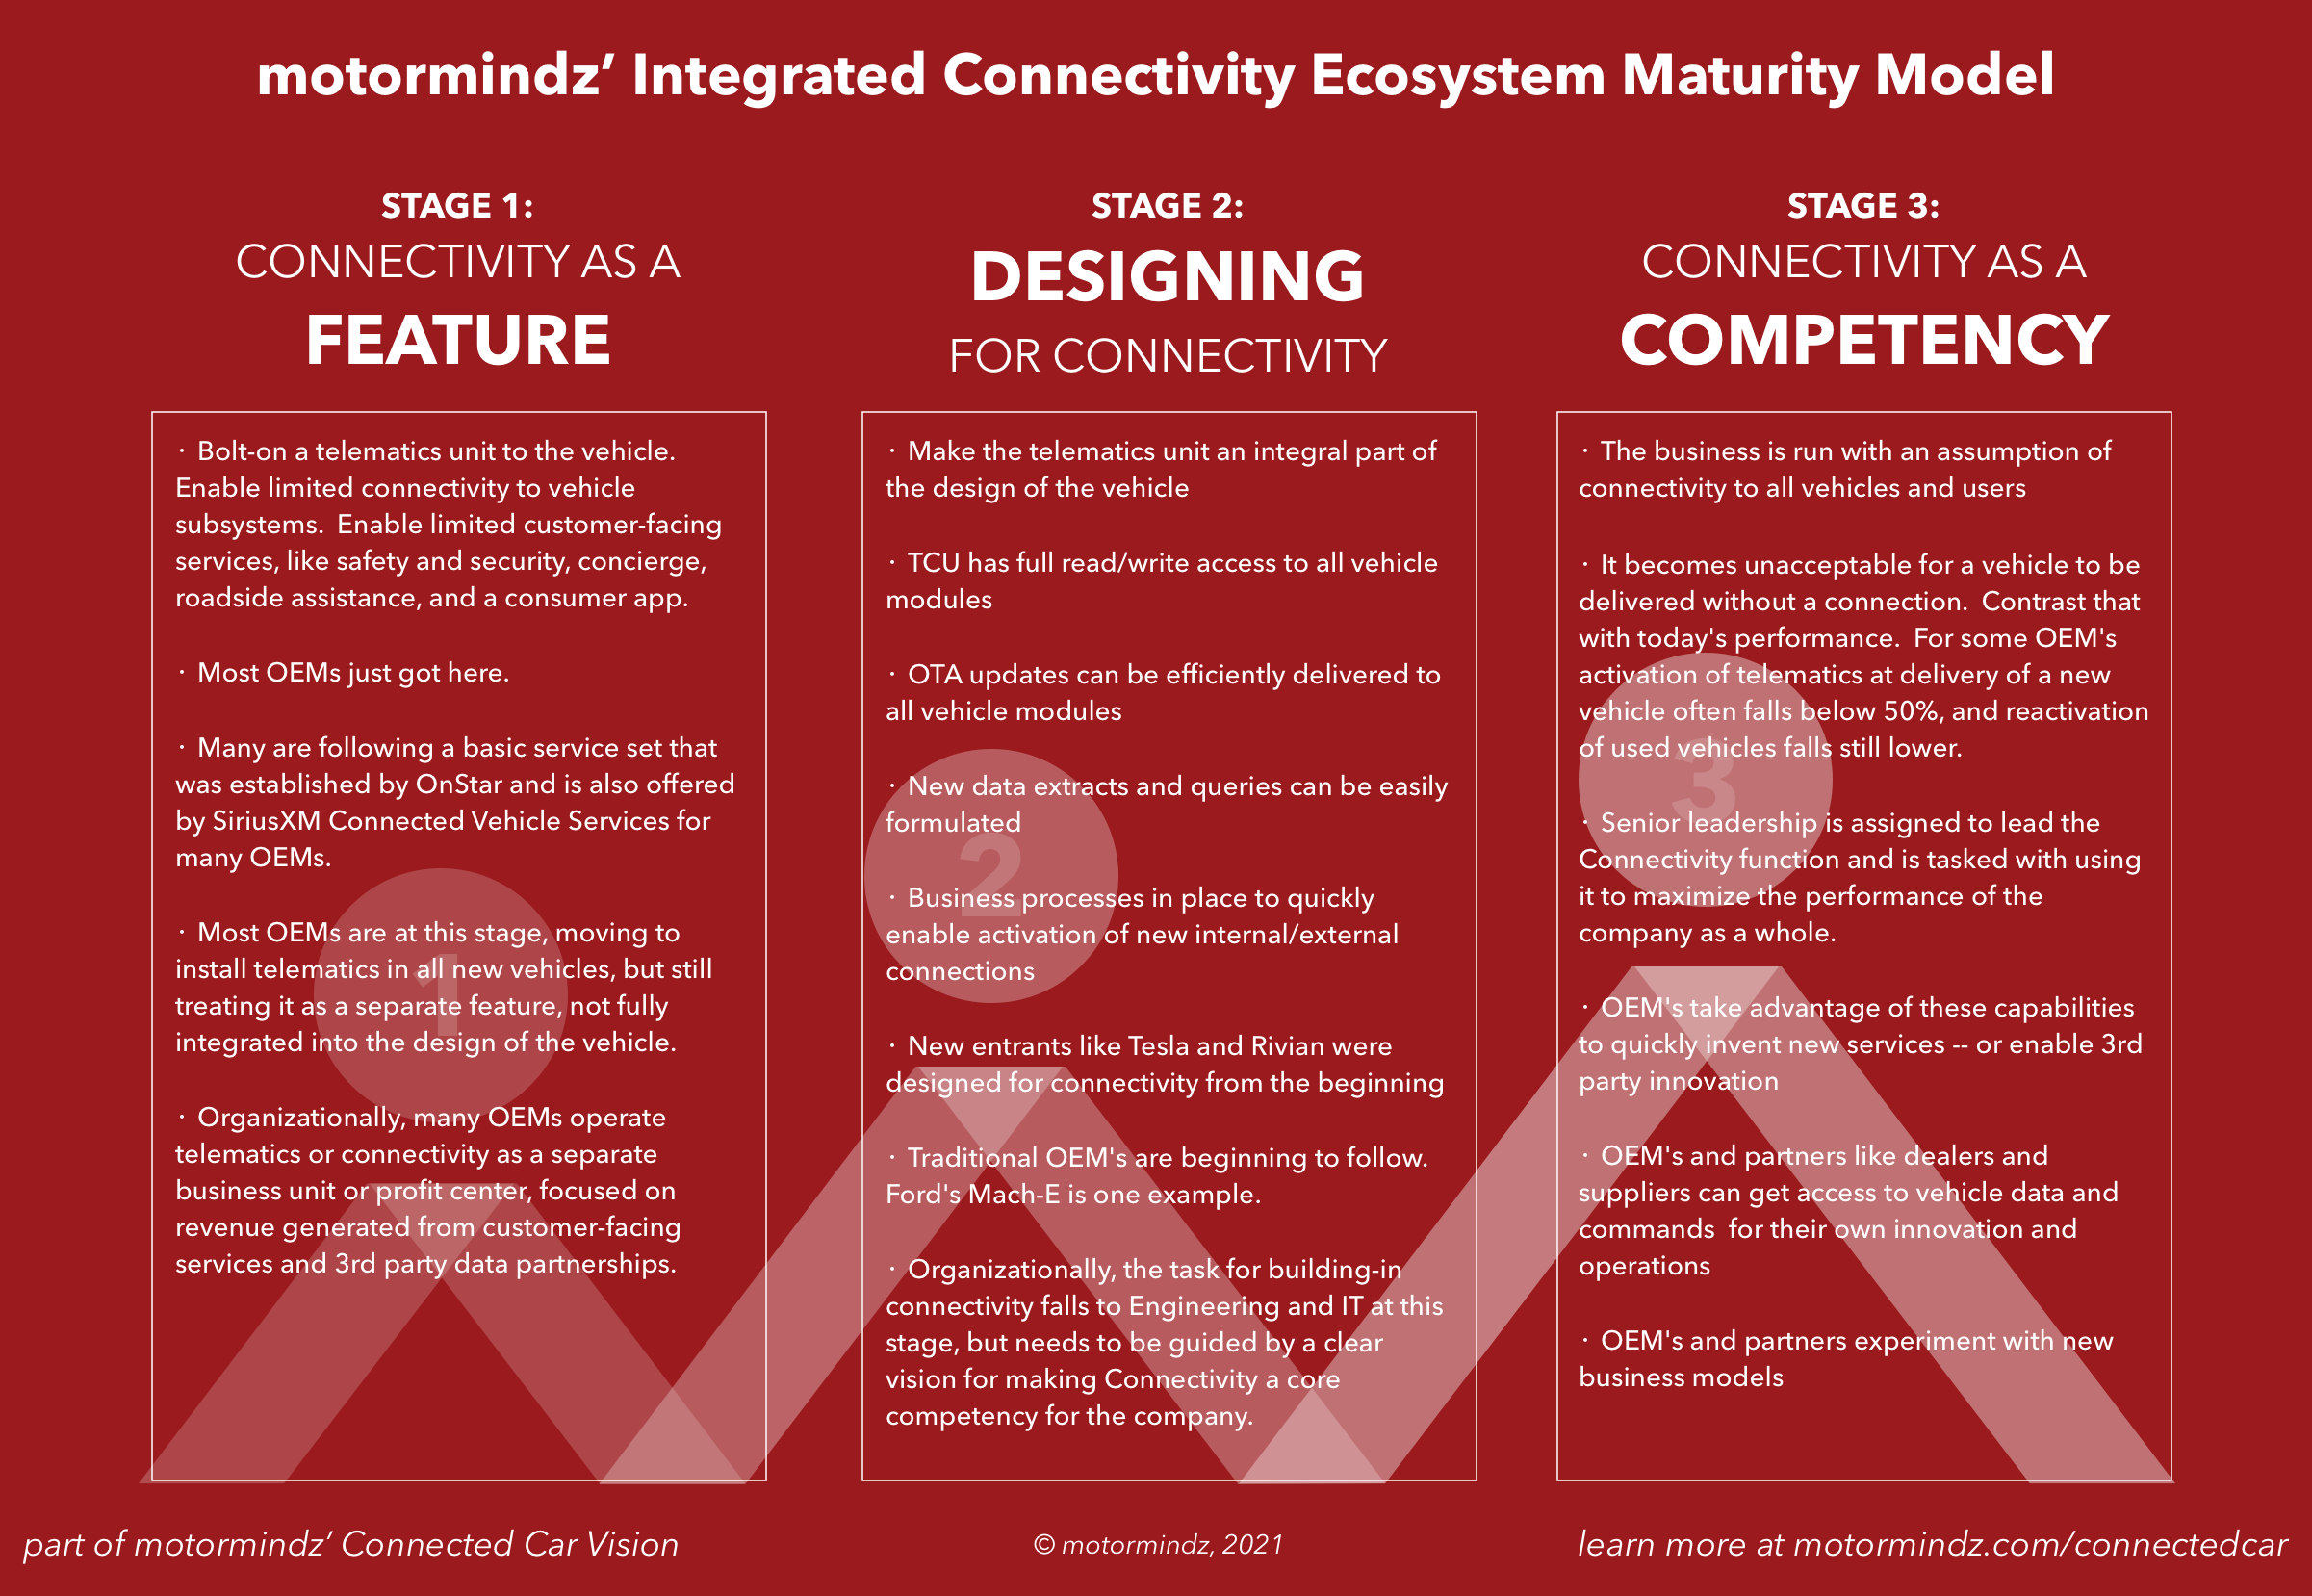 motormindz Integrated Connectivity Ecosystem Maturity Model. motormindz is a venture consultancy​ for the automotive industry​​. ​We advise and invest​ ​to create and scale​ ​new product ecosystems​. ​​​We provide ​automotive venture consulting​​ for startups, OEMs and dealers.​